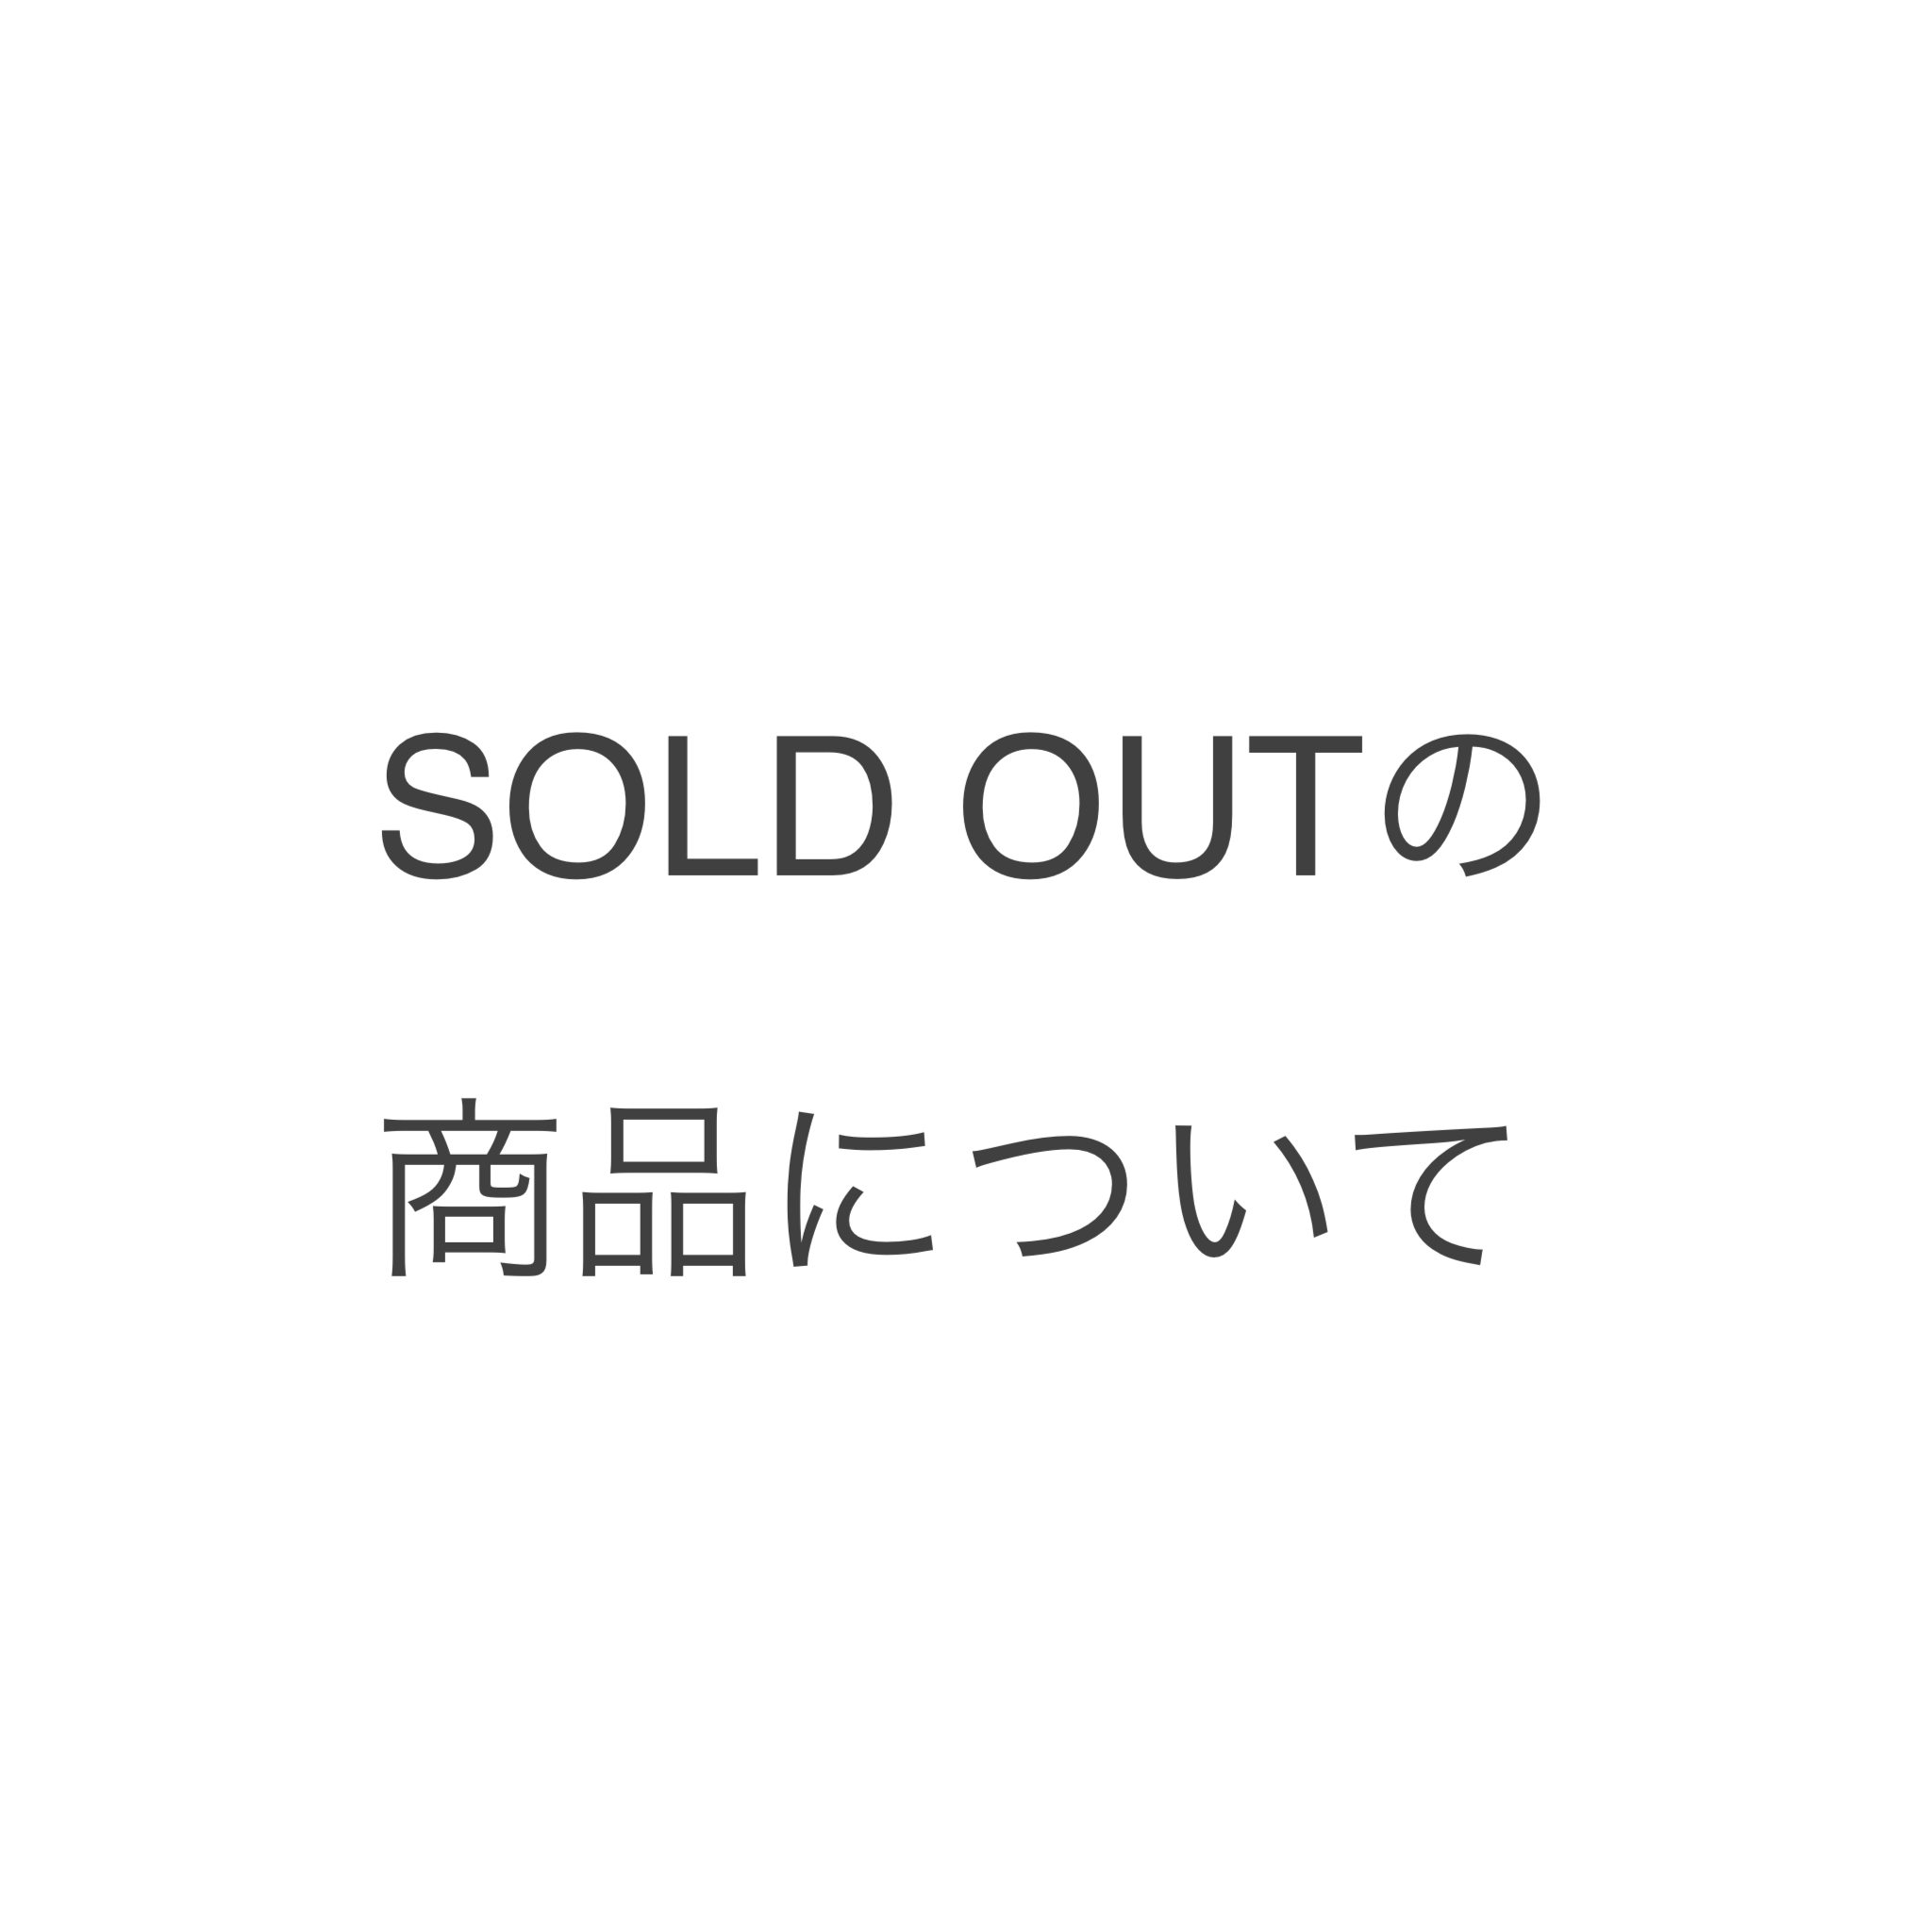 SOLD OUT の商品について。